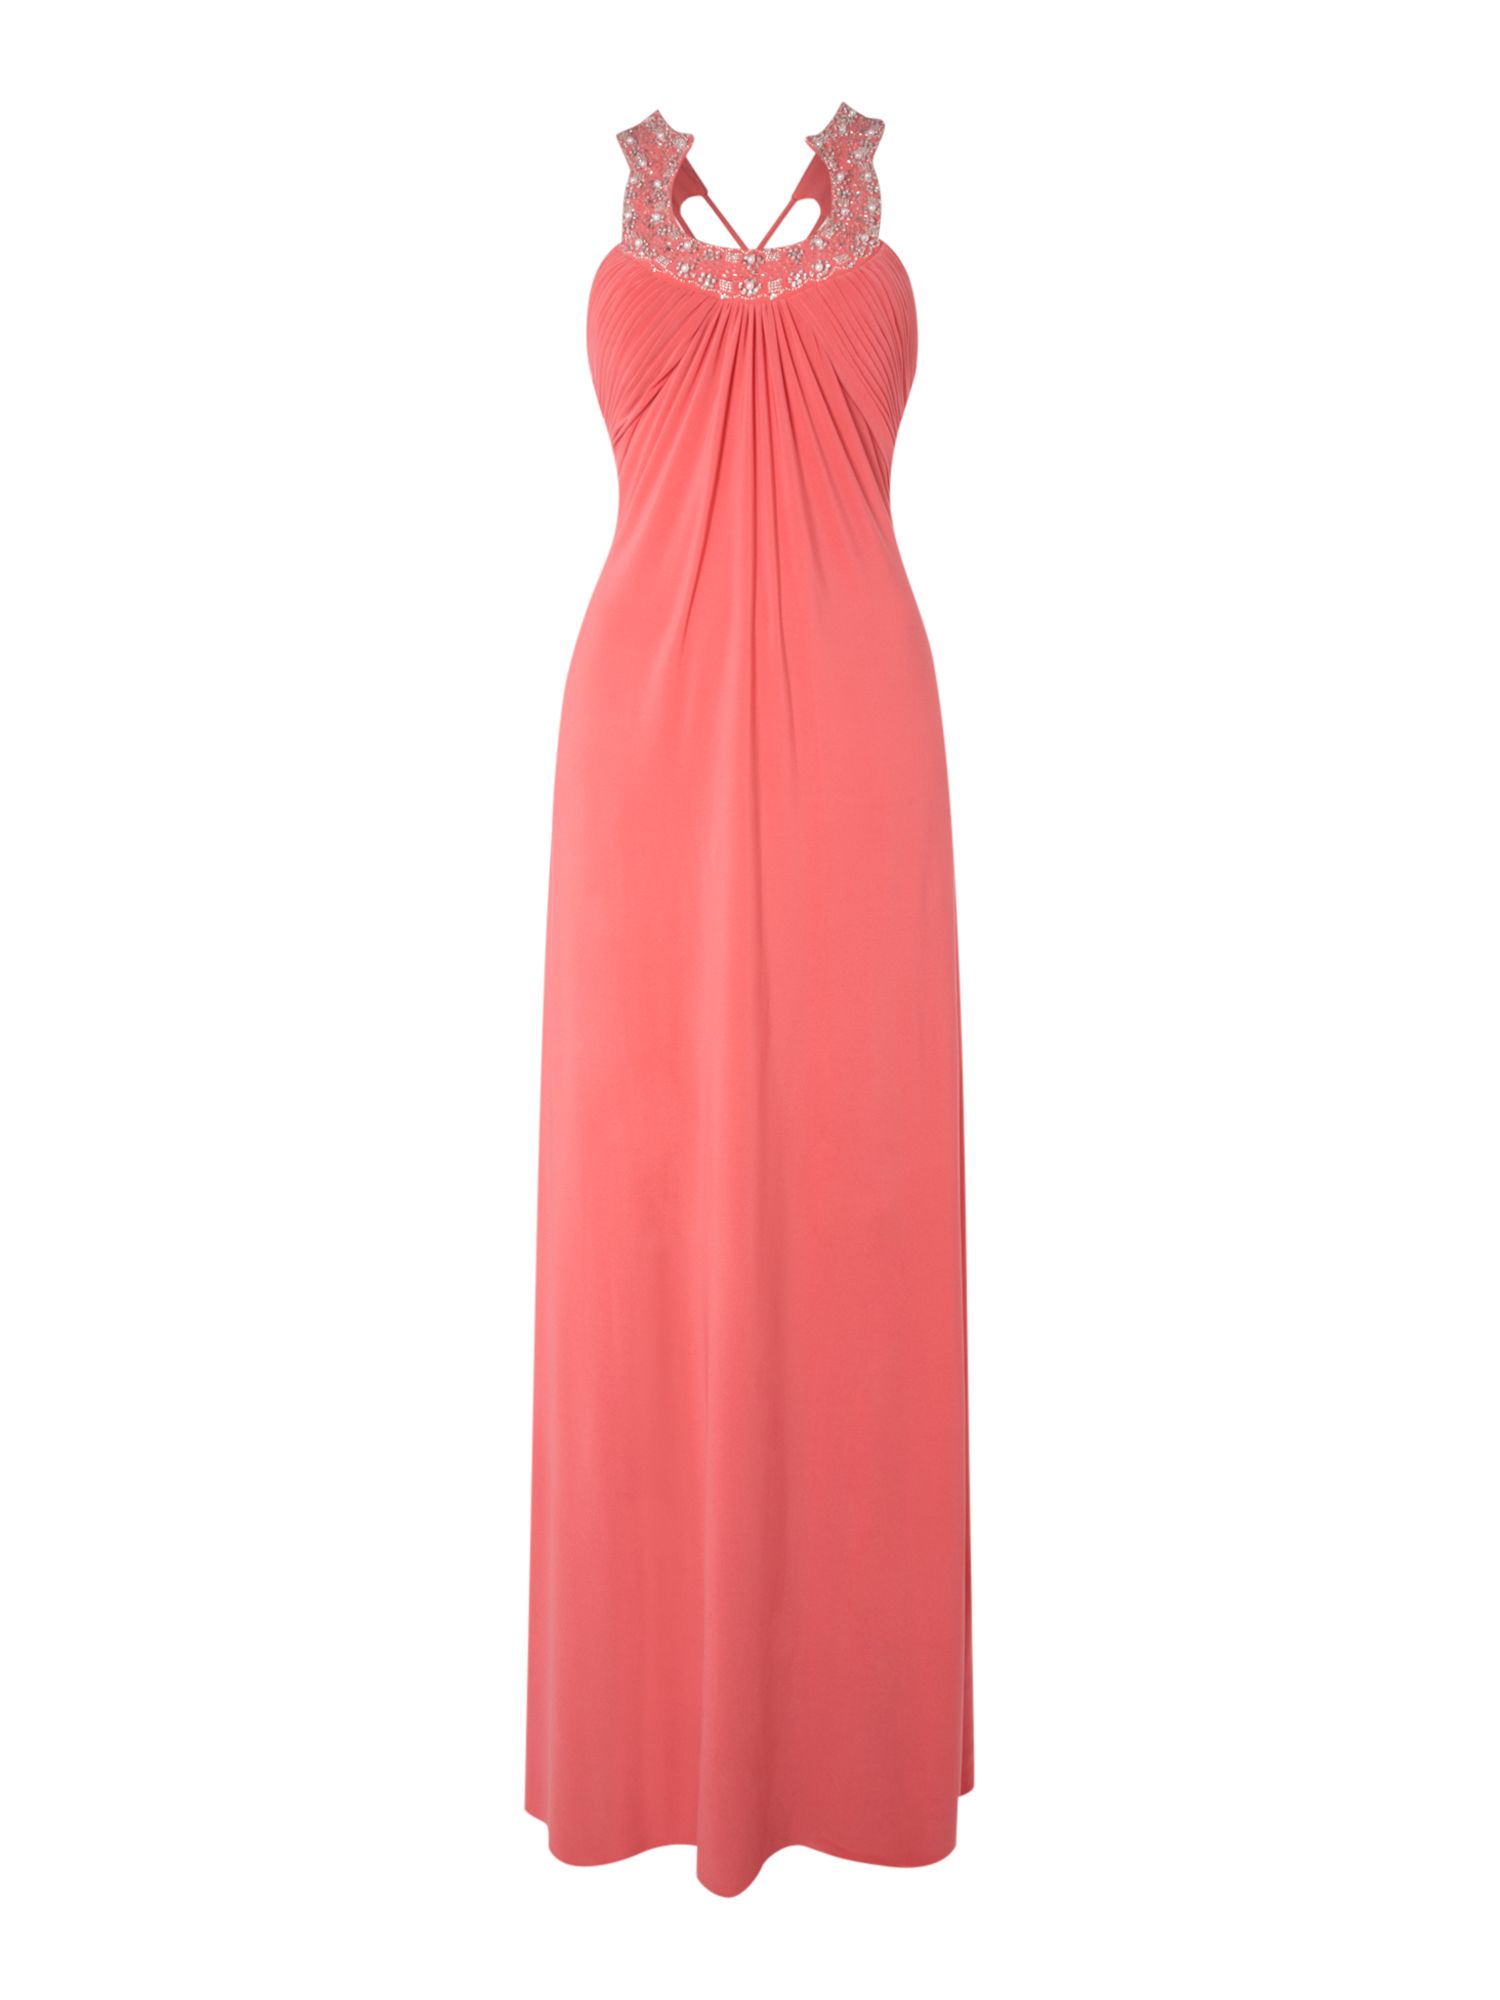 Js Collections Beaded Horseshoe Dress in Pink (coral) | Lyst